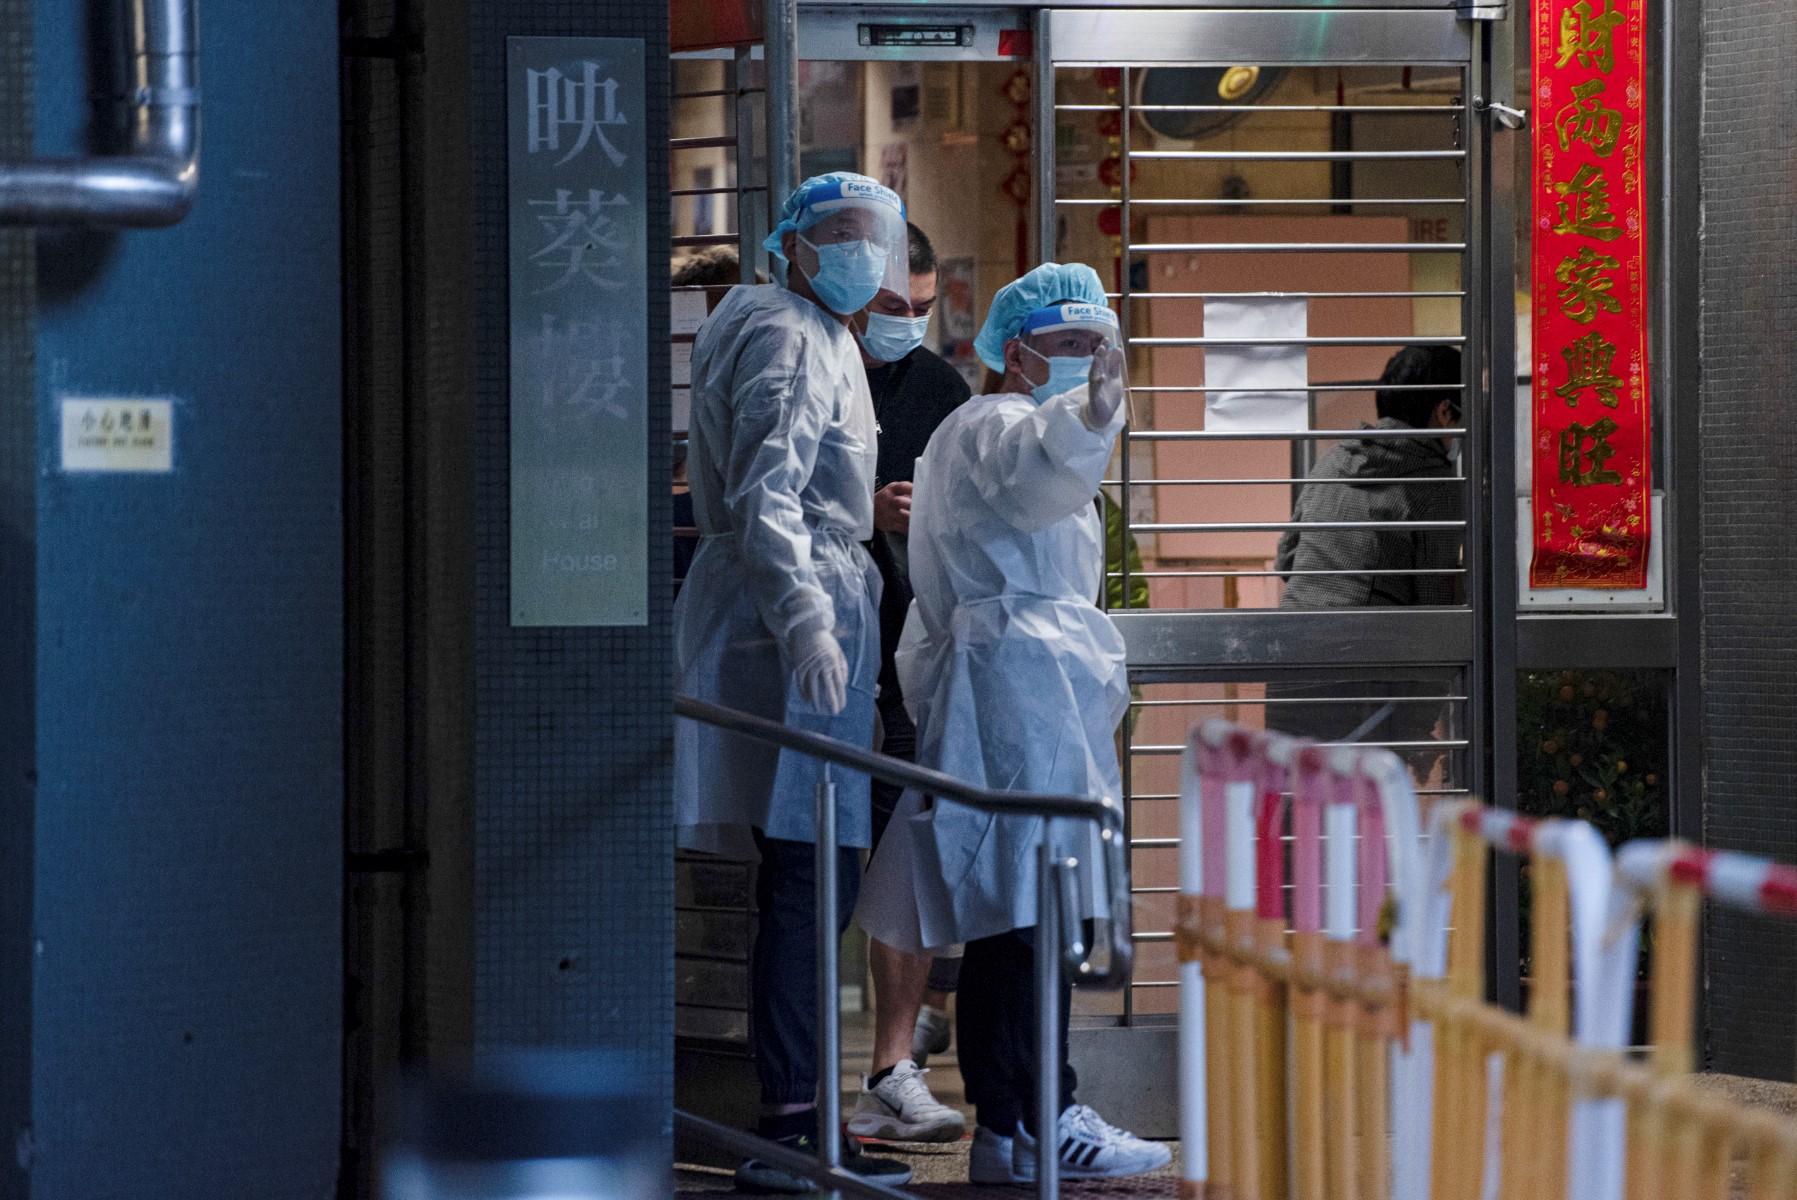 Health workers guide residents outside a building placed under lockdown at the Kwai Chung Estate public housing complex in Hong Kong on Jan 22, amid a rise in coronavirus cases fuelled by the Omicron variant. Photo: AFP